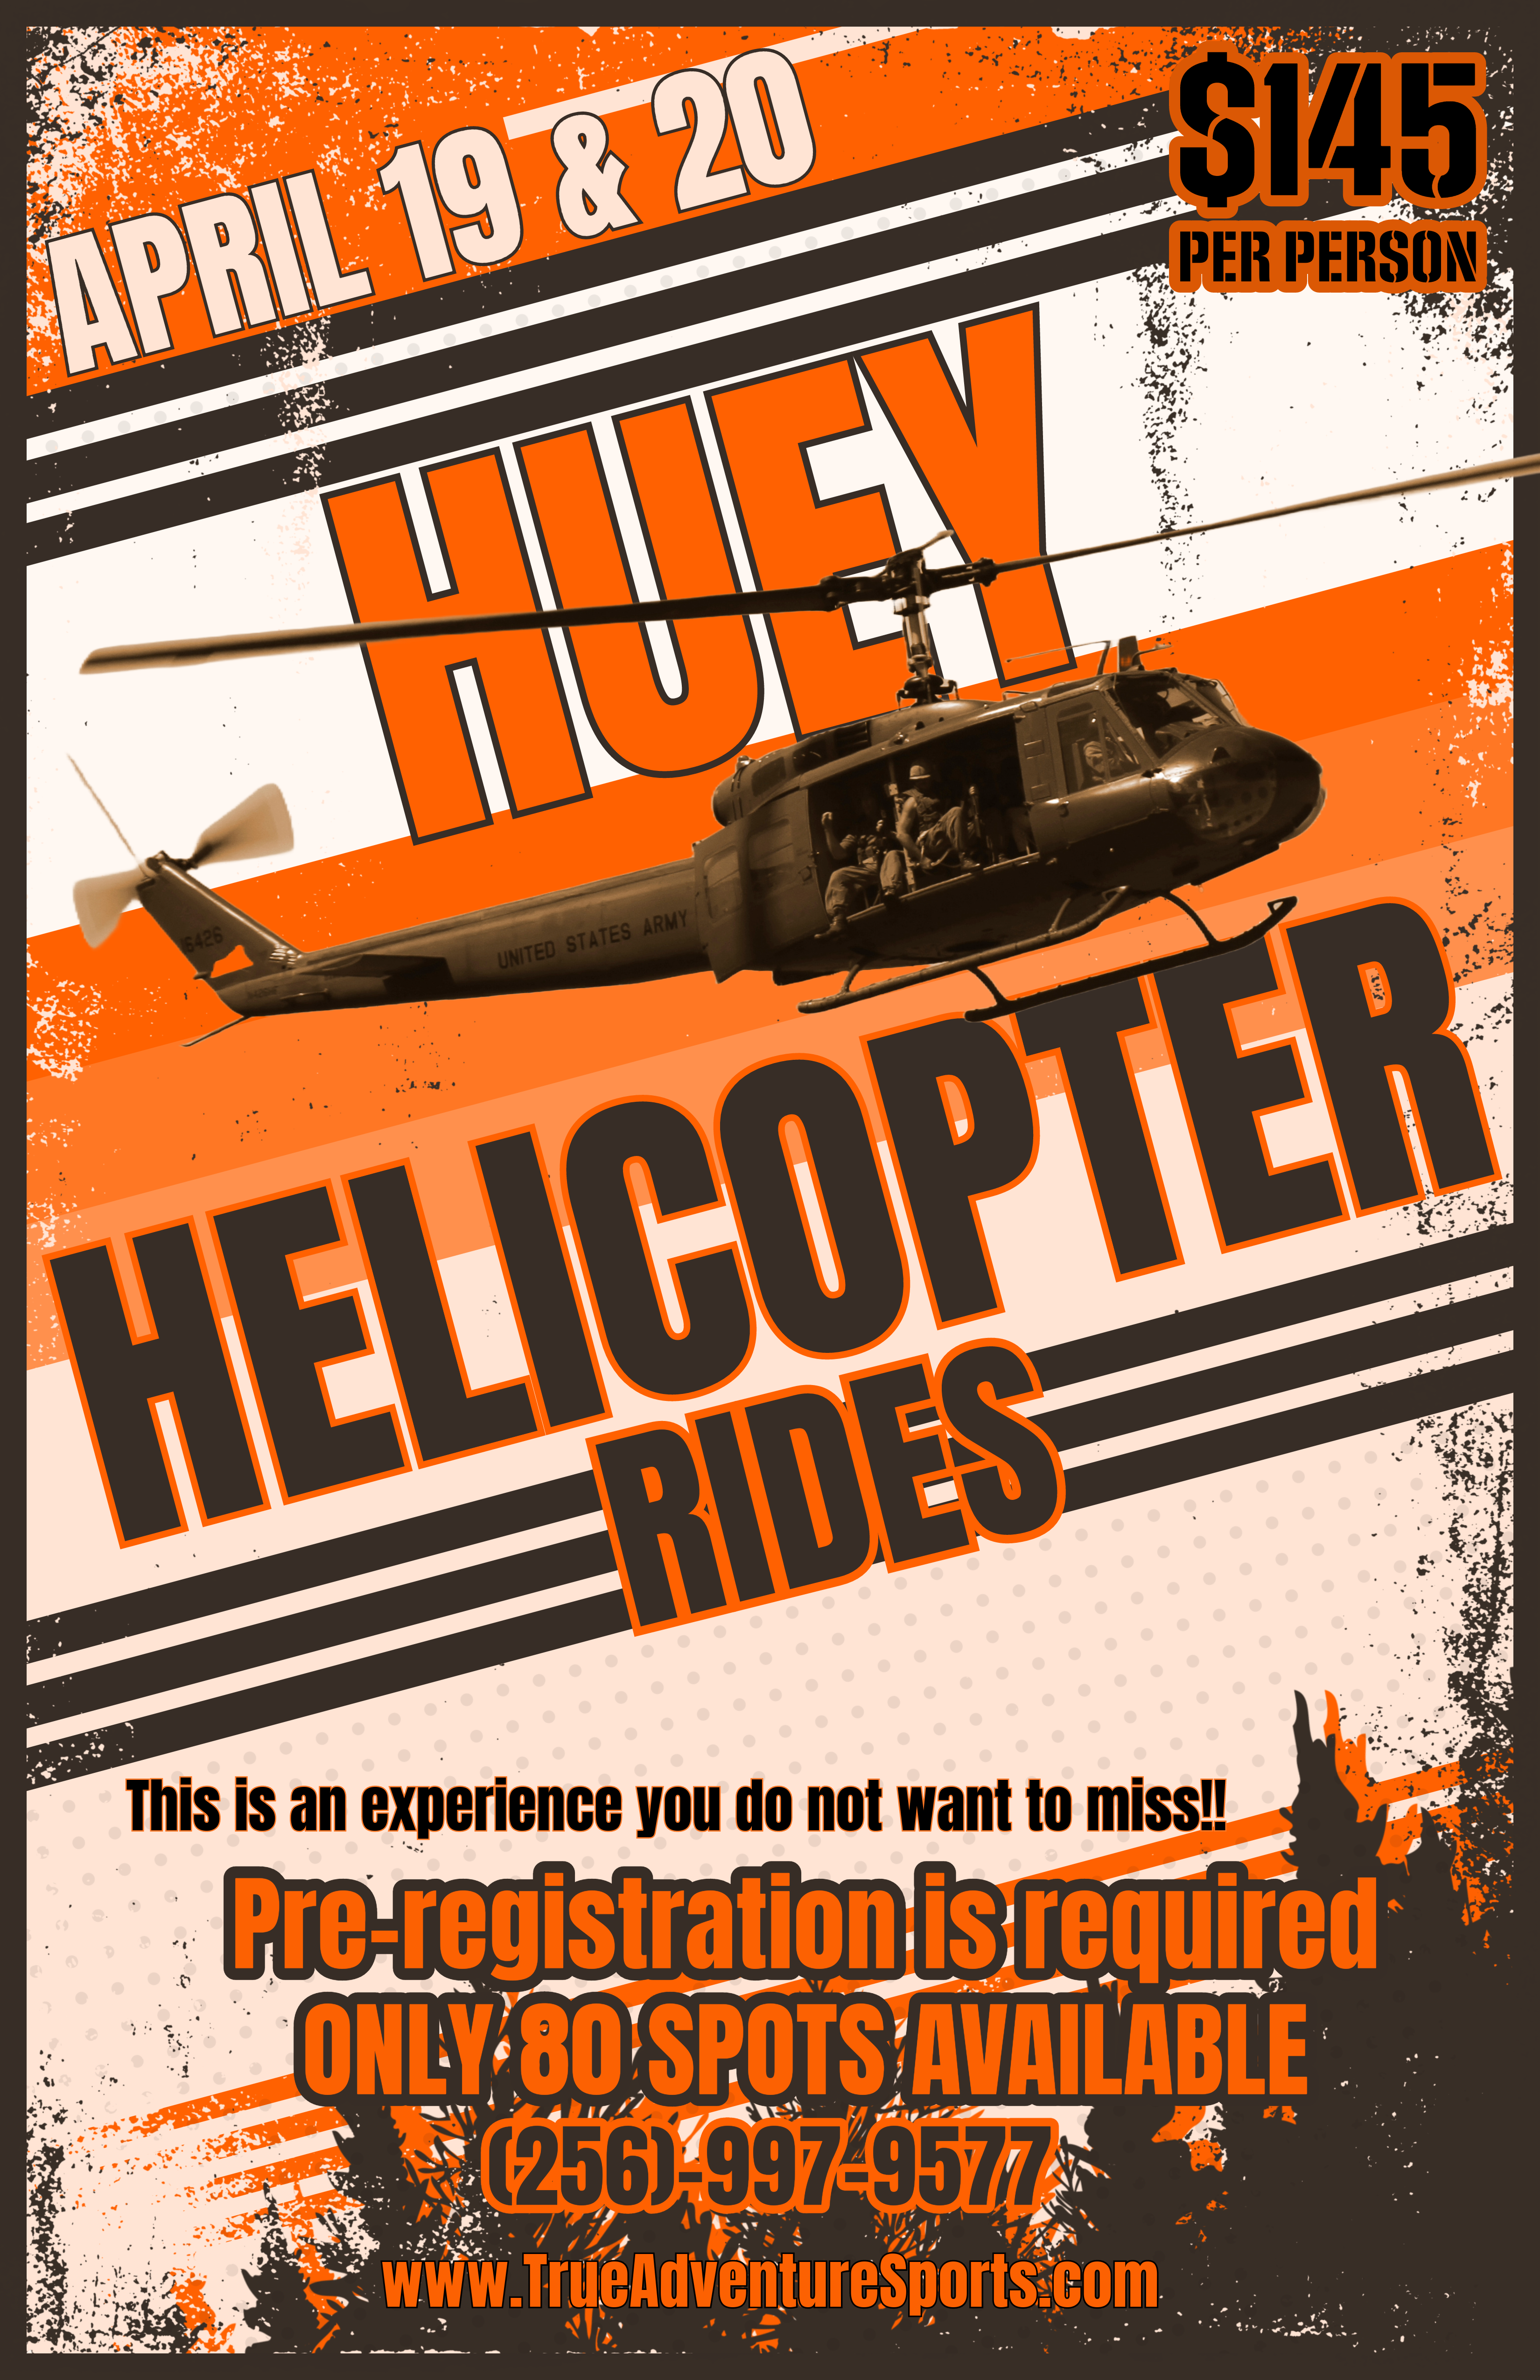 Huey Helicopter Rides